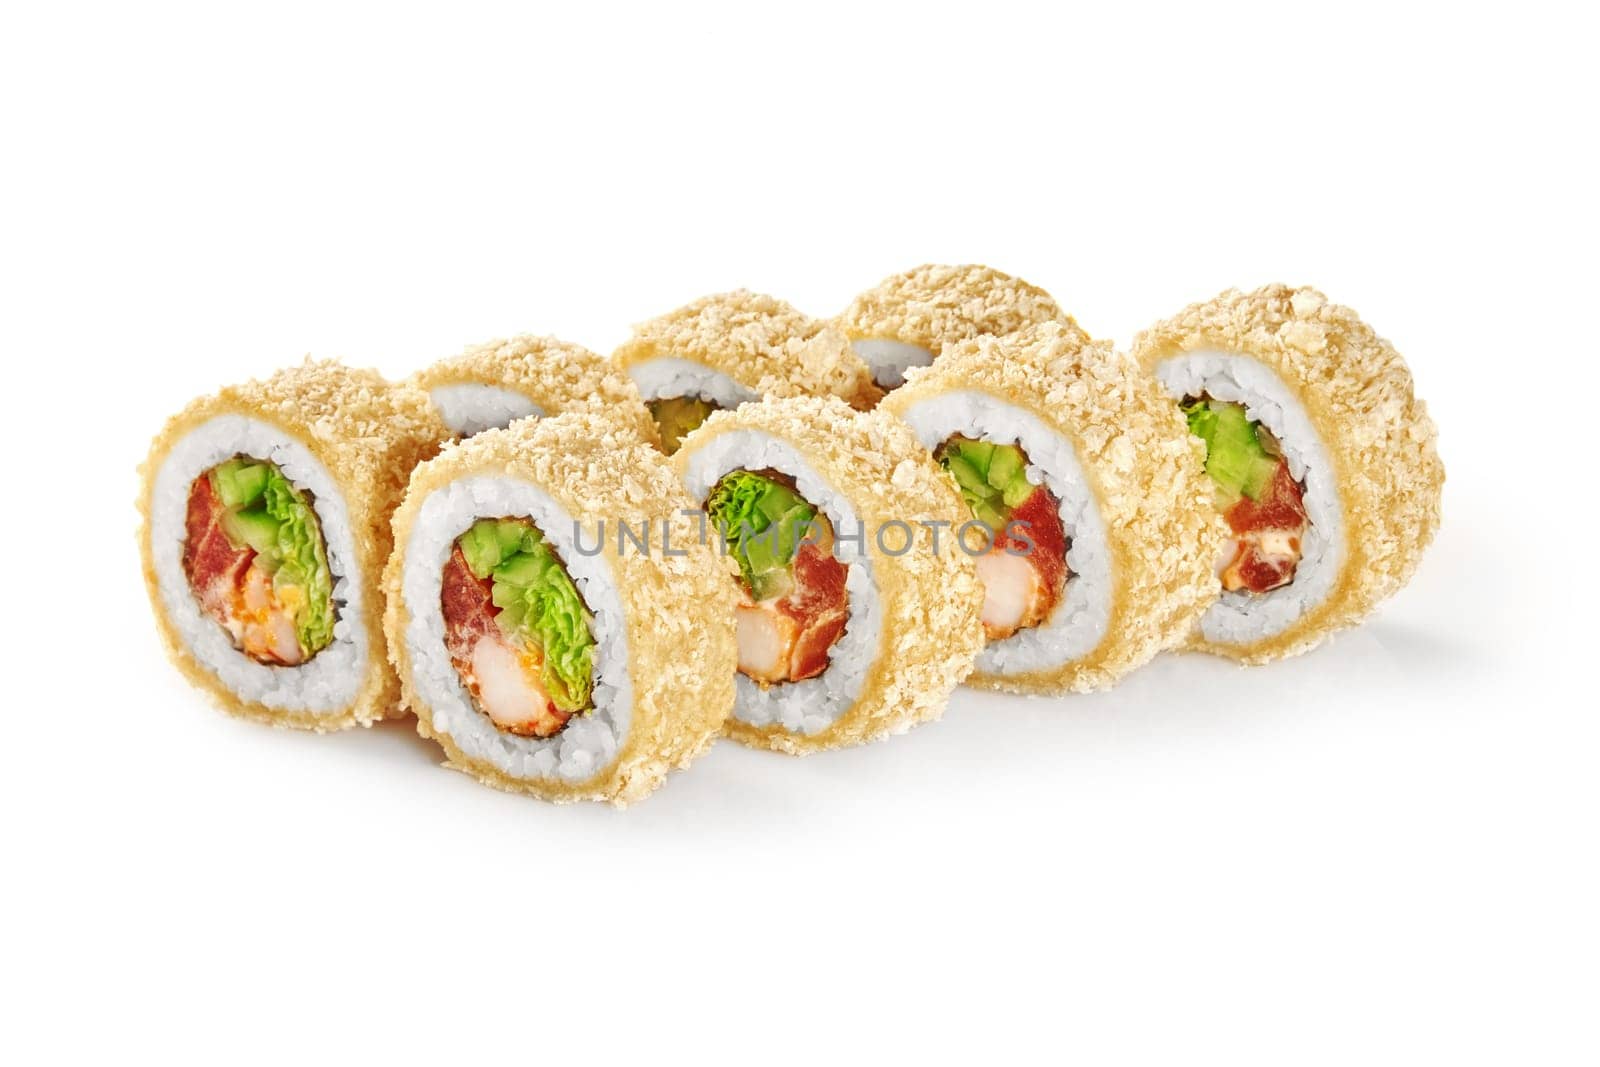 Delicious warm tempura sushi rolls with tiger shrimp, masago, tomato, cucumber and lettuce traditionally topped with panko breadcrumbs, displayed on white background. Authentic Japanese cuisine